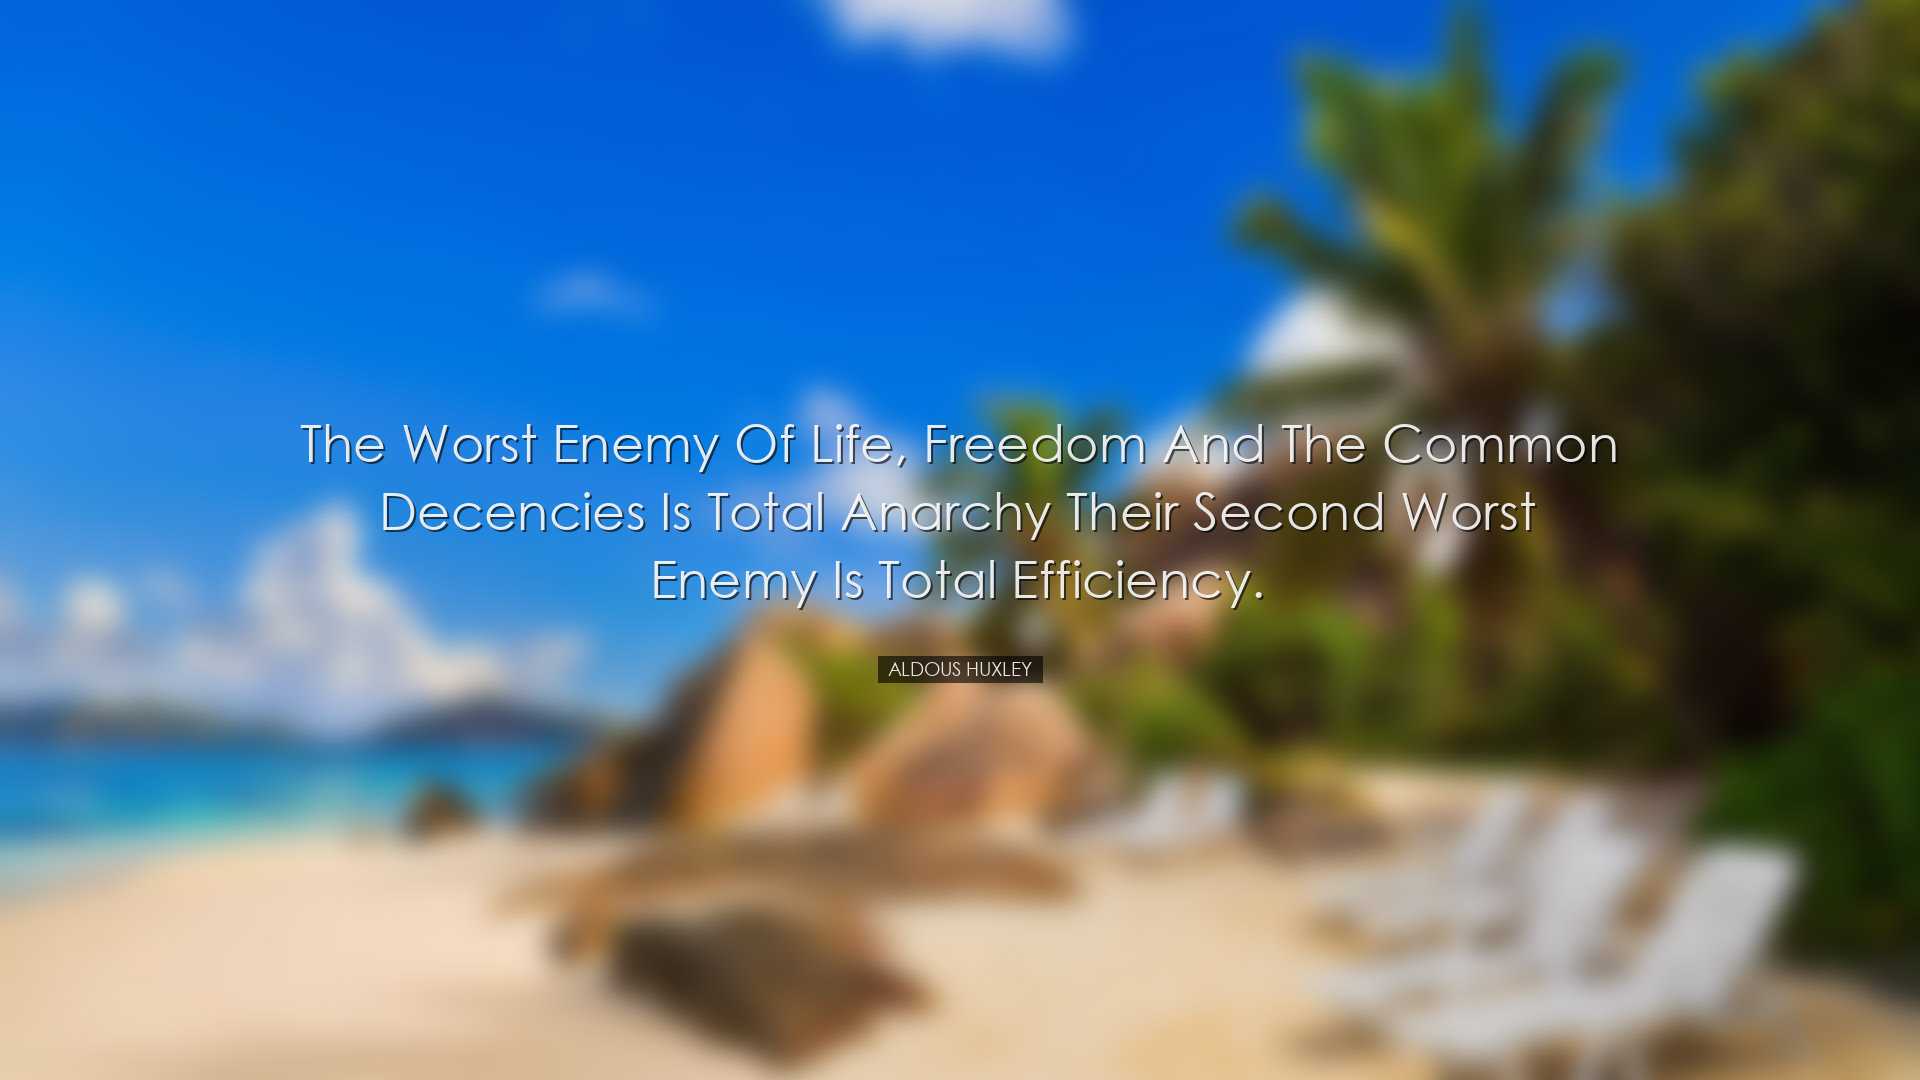 The worst enemy of life, freedom and the common decencies is total